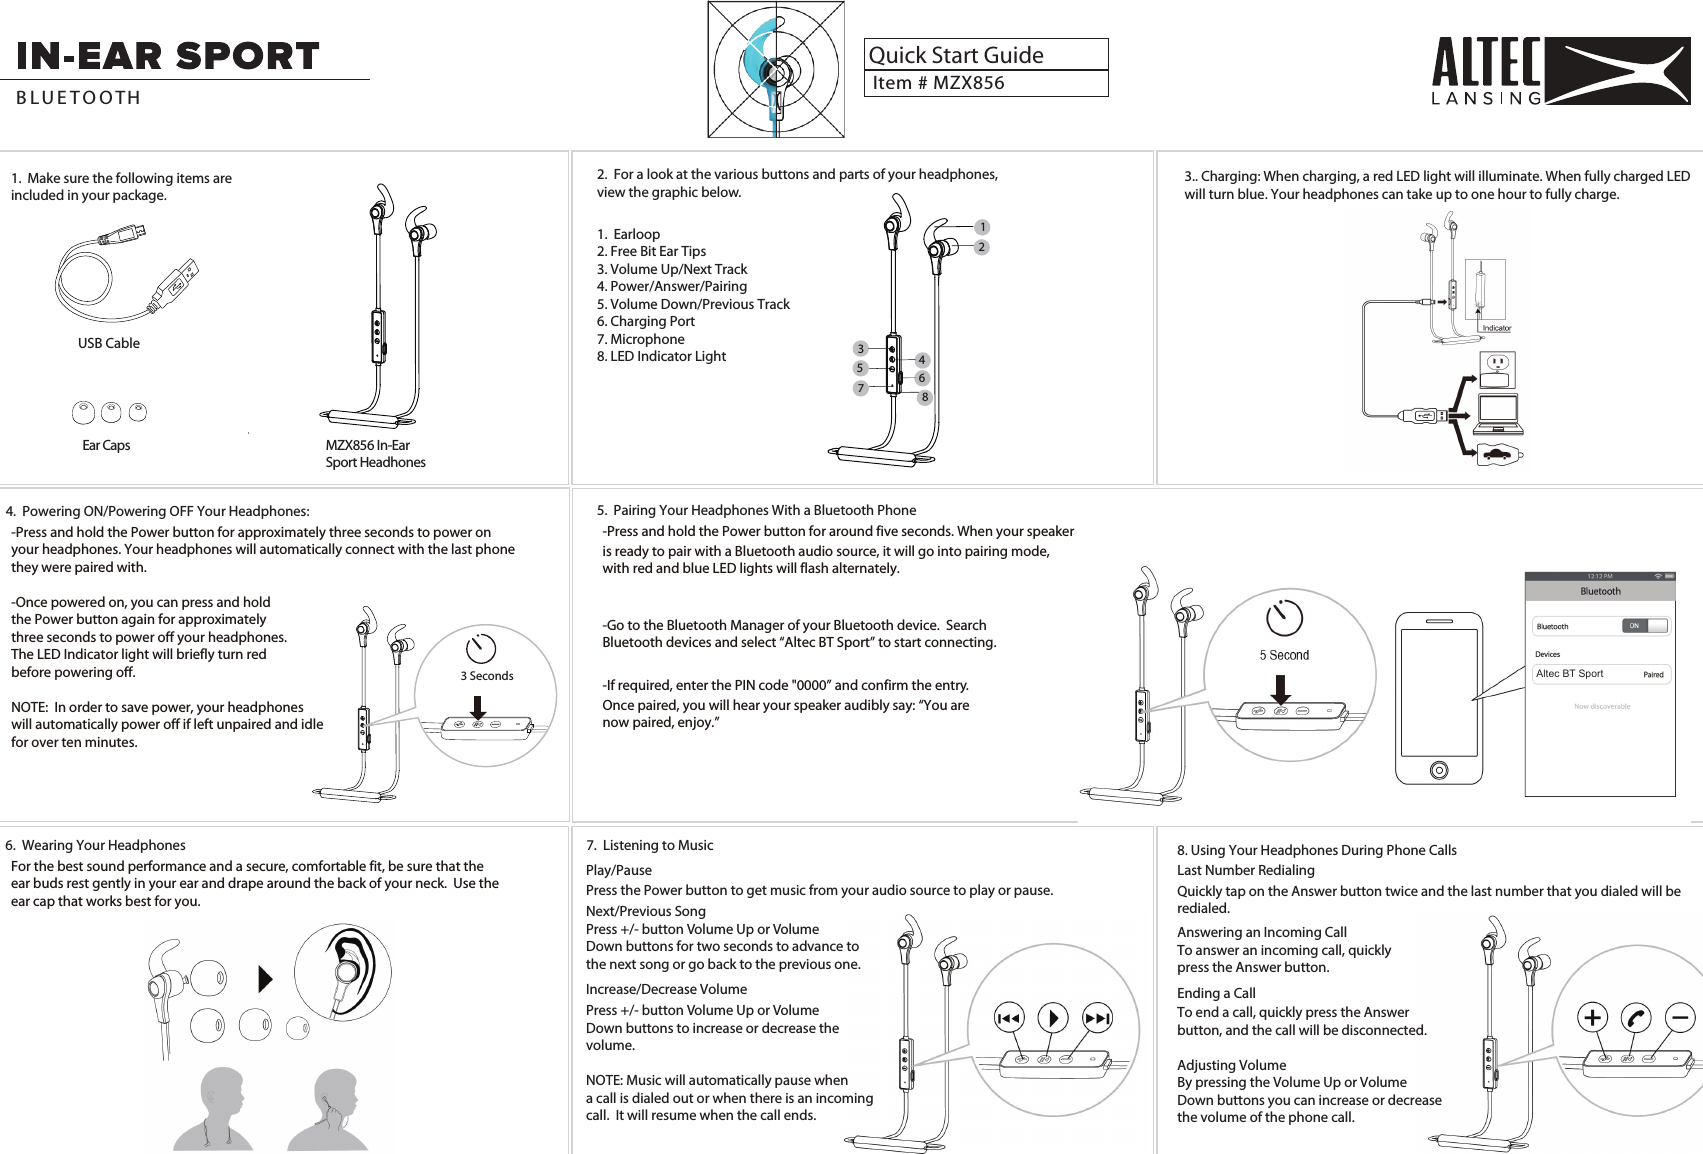 1.  Make sure the following items are included in your package.Ear CapsUSB CableMZX856 In-Ear Sport HeadhonesItem # MZX856Quick Start GuideB L U E T O O TH 2.  For a look at the various buttons and parts of your headphones, view the graphic below.1.  Earloop2. Free Bit Ear Tips3. Volume Up/Next Track4. Power/Answer/Pairing5. Volume Down/Previous Track6. Charging Port7. Microphone8. LED Indicator Light123456875.  Pairing Your Headphones With a Bluetooth Phone-Press and hold the Power button for around five seconds. When your speaker 6.  Wearing Your Headphones For the best sound performance and a secure, comfortable fit, be sure that the ear buds rest gently in your ear and drape around the back of your neck.  Use theear cap that works best for you. 7.  Listening to Musicis ready to pair with a Bluetooth audio source, it will go into pairing mode, with red and blue LED lights will flash alternately. 4.  Powering ON/Powering OFF Your Headphones:-Press and hold the Power button for approximately three seconds to power on your headphones. Your headphones will automatically connect with the last phonethey were paired with.  -Once powered on, you can press and hold the Power button again for approximately three seconds to power off your headphones.The LED Indicator light will briefly turn redbefore powering off.NOTE:  In order to save power, your headphones will automatically power off if left unpaired and idle for over ten minutes.-Go to the Bluetooth Manager of your Bluetooth device.  Search Bluetooth devices and select “Altec BT Sport” to start connecting.-If required, enter the PIN code &quot;0000” and confirm the entry. Once paired, you will hear your speaker audibly say: “You are now paired, enjoy.”3 Seconds Altec BT SportPlay/PausePress the Power button to get music from your audio source to play or pause.Next/Previous SongPress +/- button Volume Up or VolumeDown buttons for two seconds to advance tothe next song or go back to the previous one.  Increase/Decrease VolumePress +/- button Volume Up or VolumeDown buttons to increase or decrease thevolume. NOTE: Music will automatically pause whena call is dialed out or when there is an incomingcall.  It will resume when the call ends. 8. Using Your Headphones During Phone CallsLast Number RedialingQuickly tap on the Answer button twice and the last number that you dialed will beredialed.Answering an Incoming CallTo answer an incoming call, quicklypress the Answer button.Ending a CallTo end a call, quickly press the Answerbutton, and the call will be disconnected.Adjusting VolumeBy pressing the Volume Up or VolumeDown buttons you can increase or decreasethe volume of the phone call.3.. Charging: When charging, a red LED light will illuminate. When fully charged LED will turn blue. Your headphones can take up to one hour to fully charge.